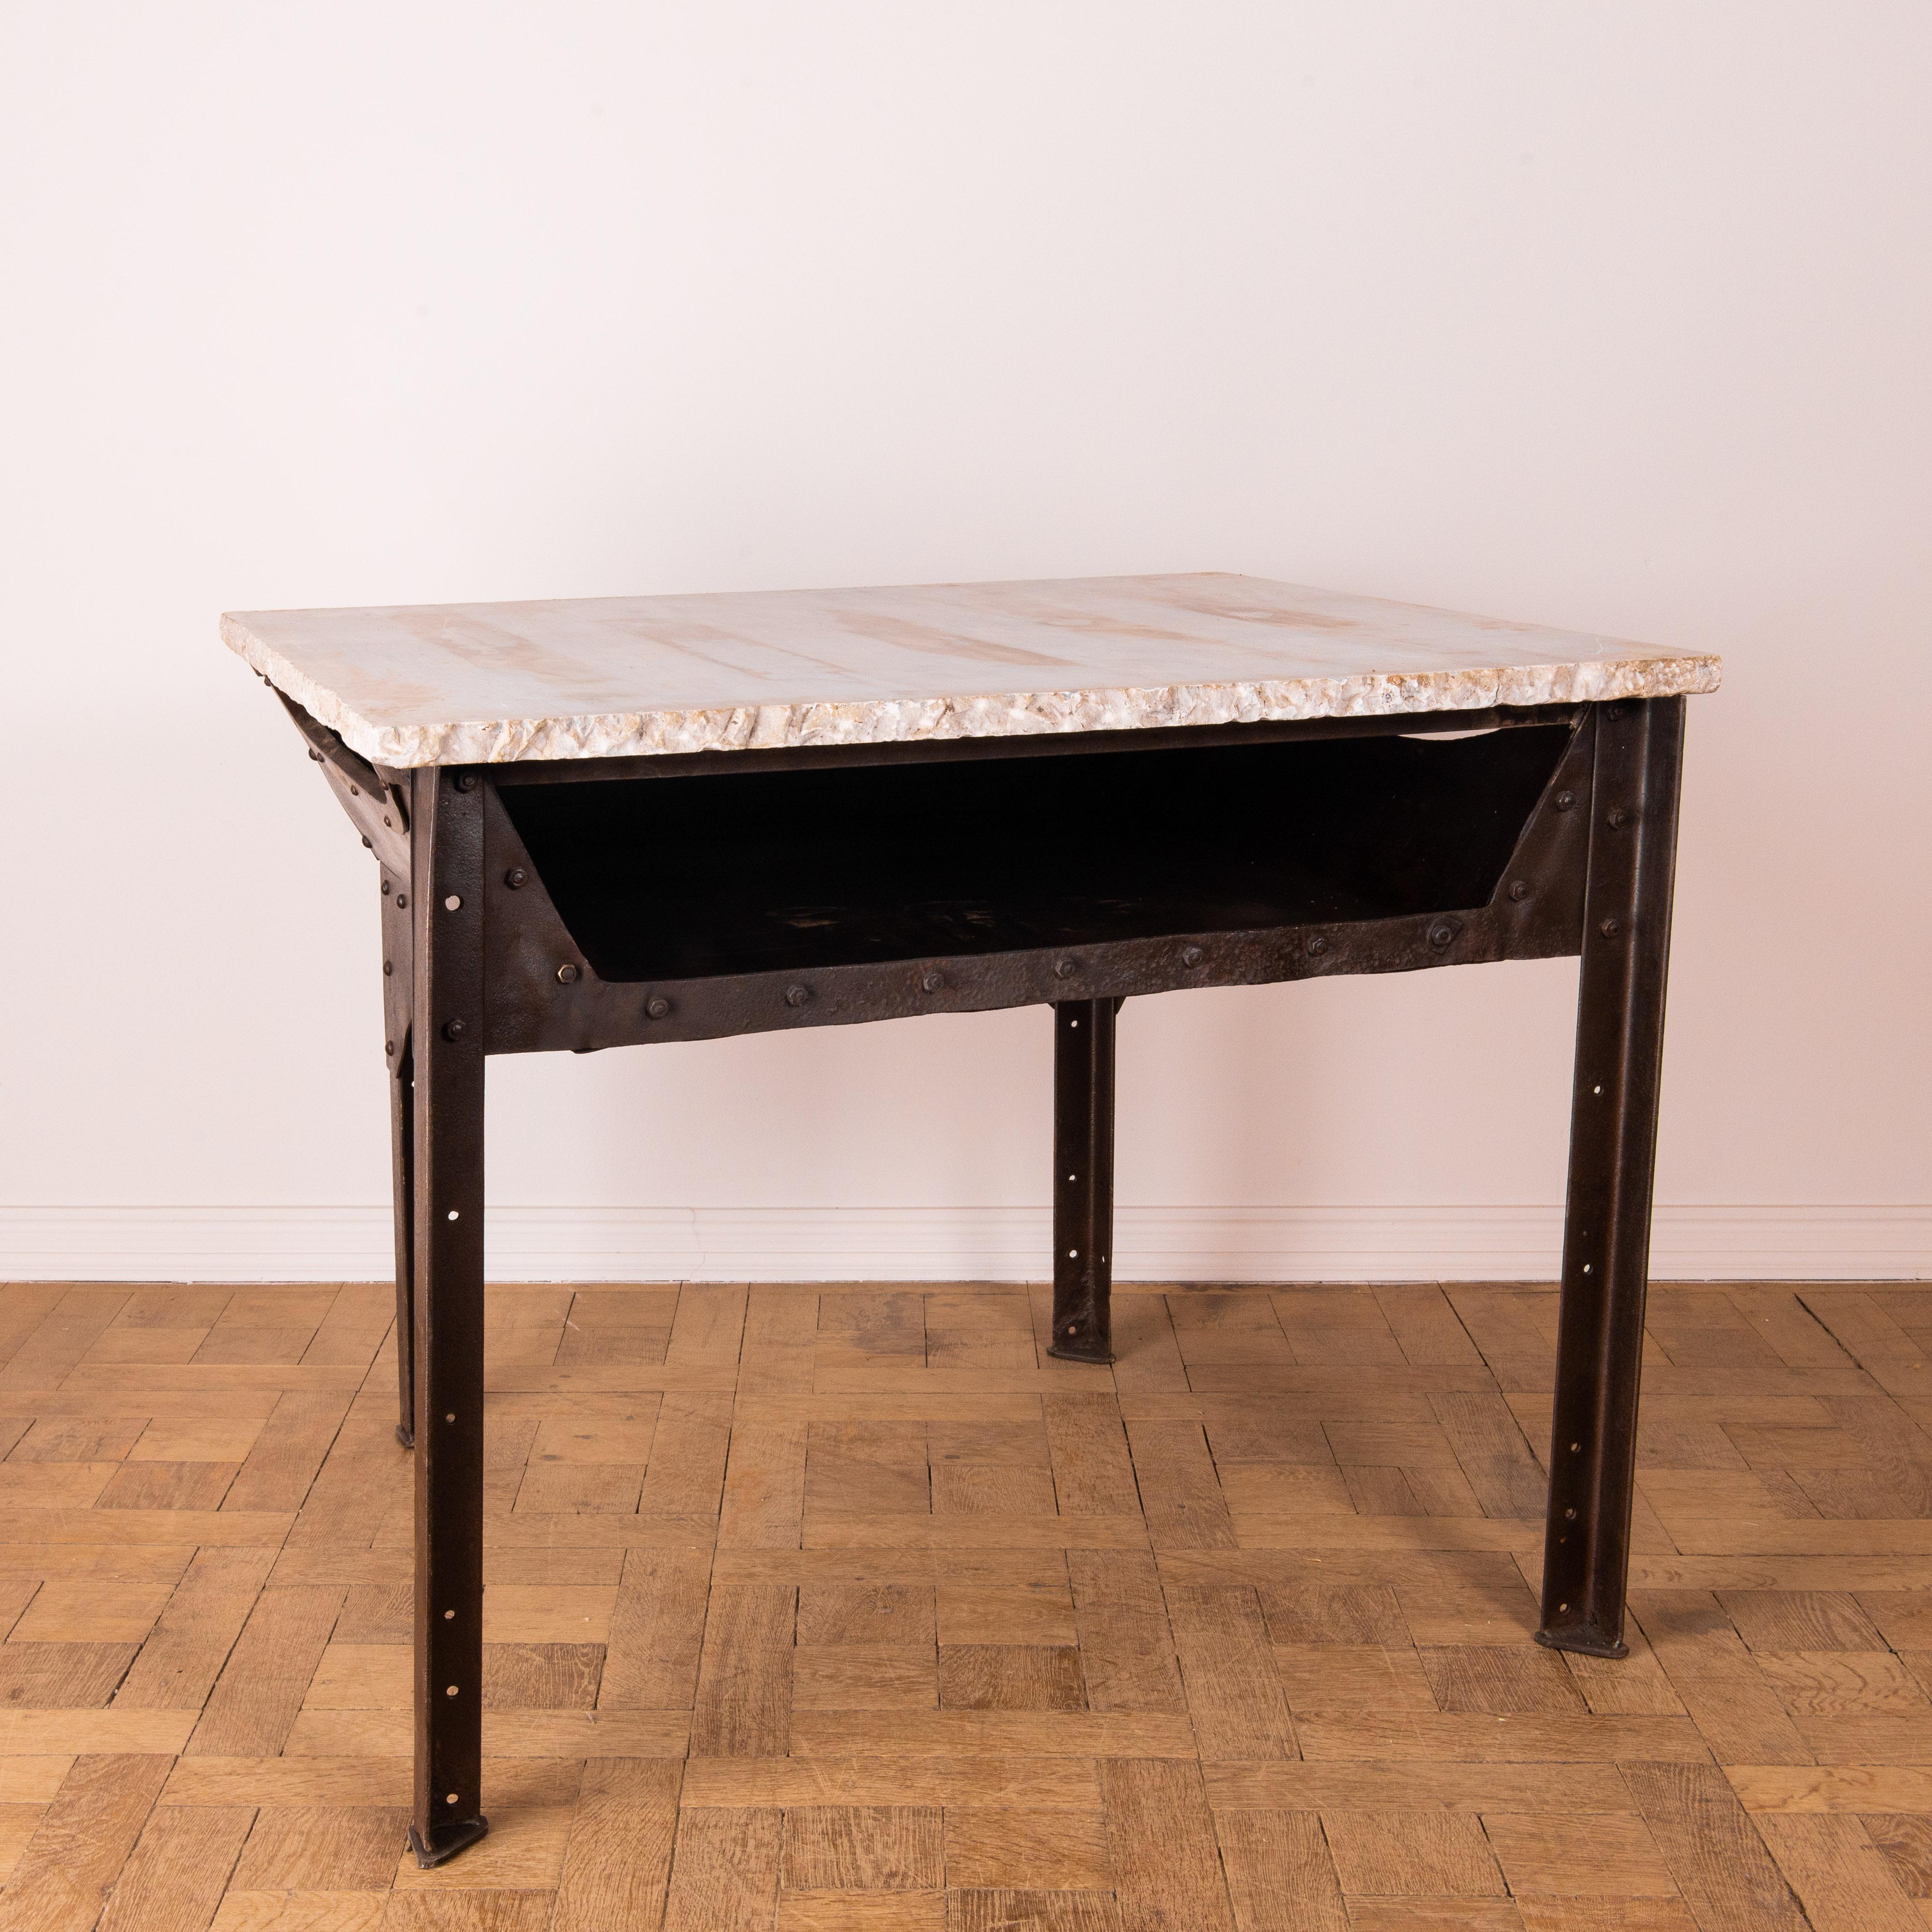 This unique table comes from Czech Republic, circa 1920. These limited production work pieces were built for factory specific settings, featuring robust and wear resistant iron construction. The riveted steel frame gives ample support for frequent